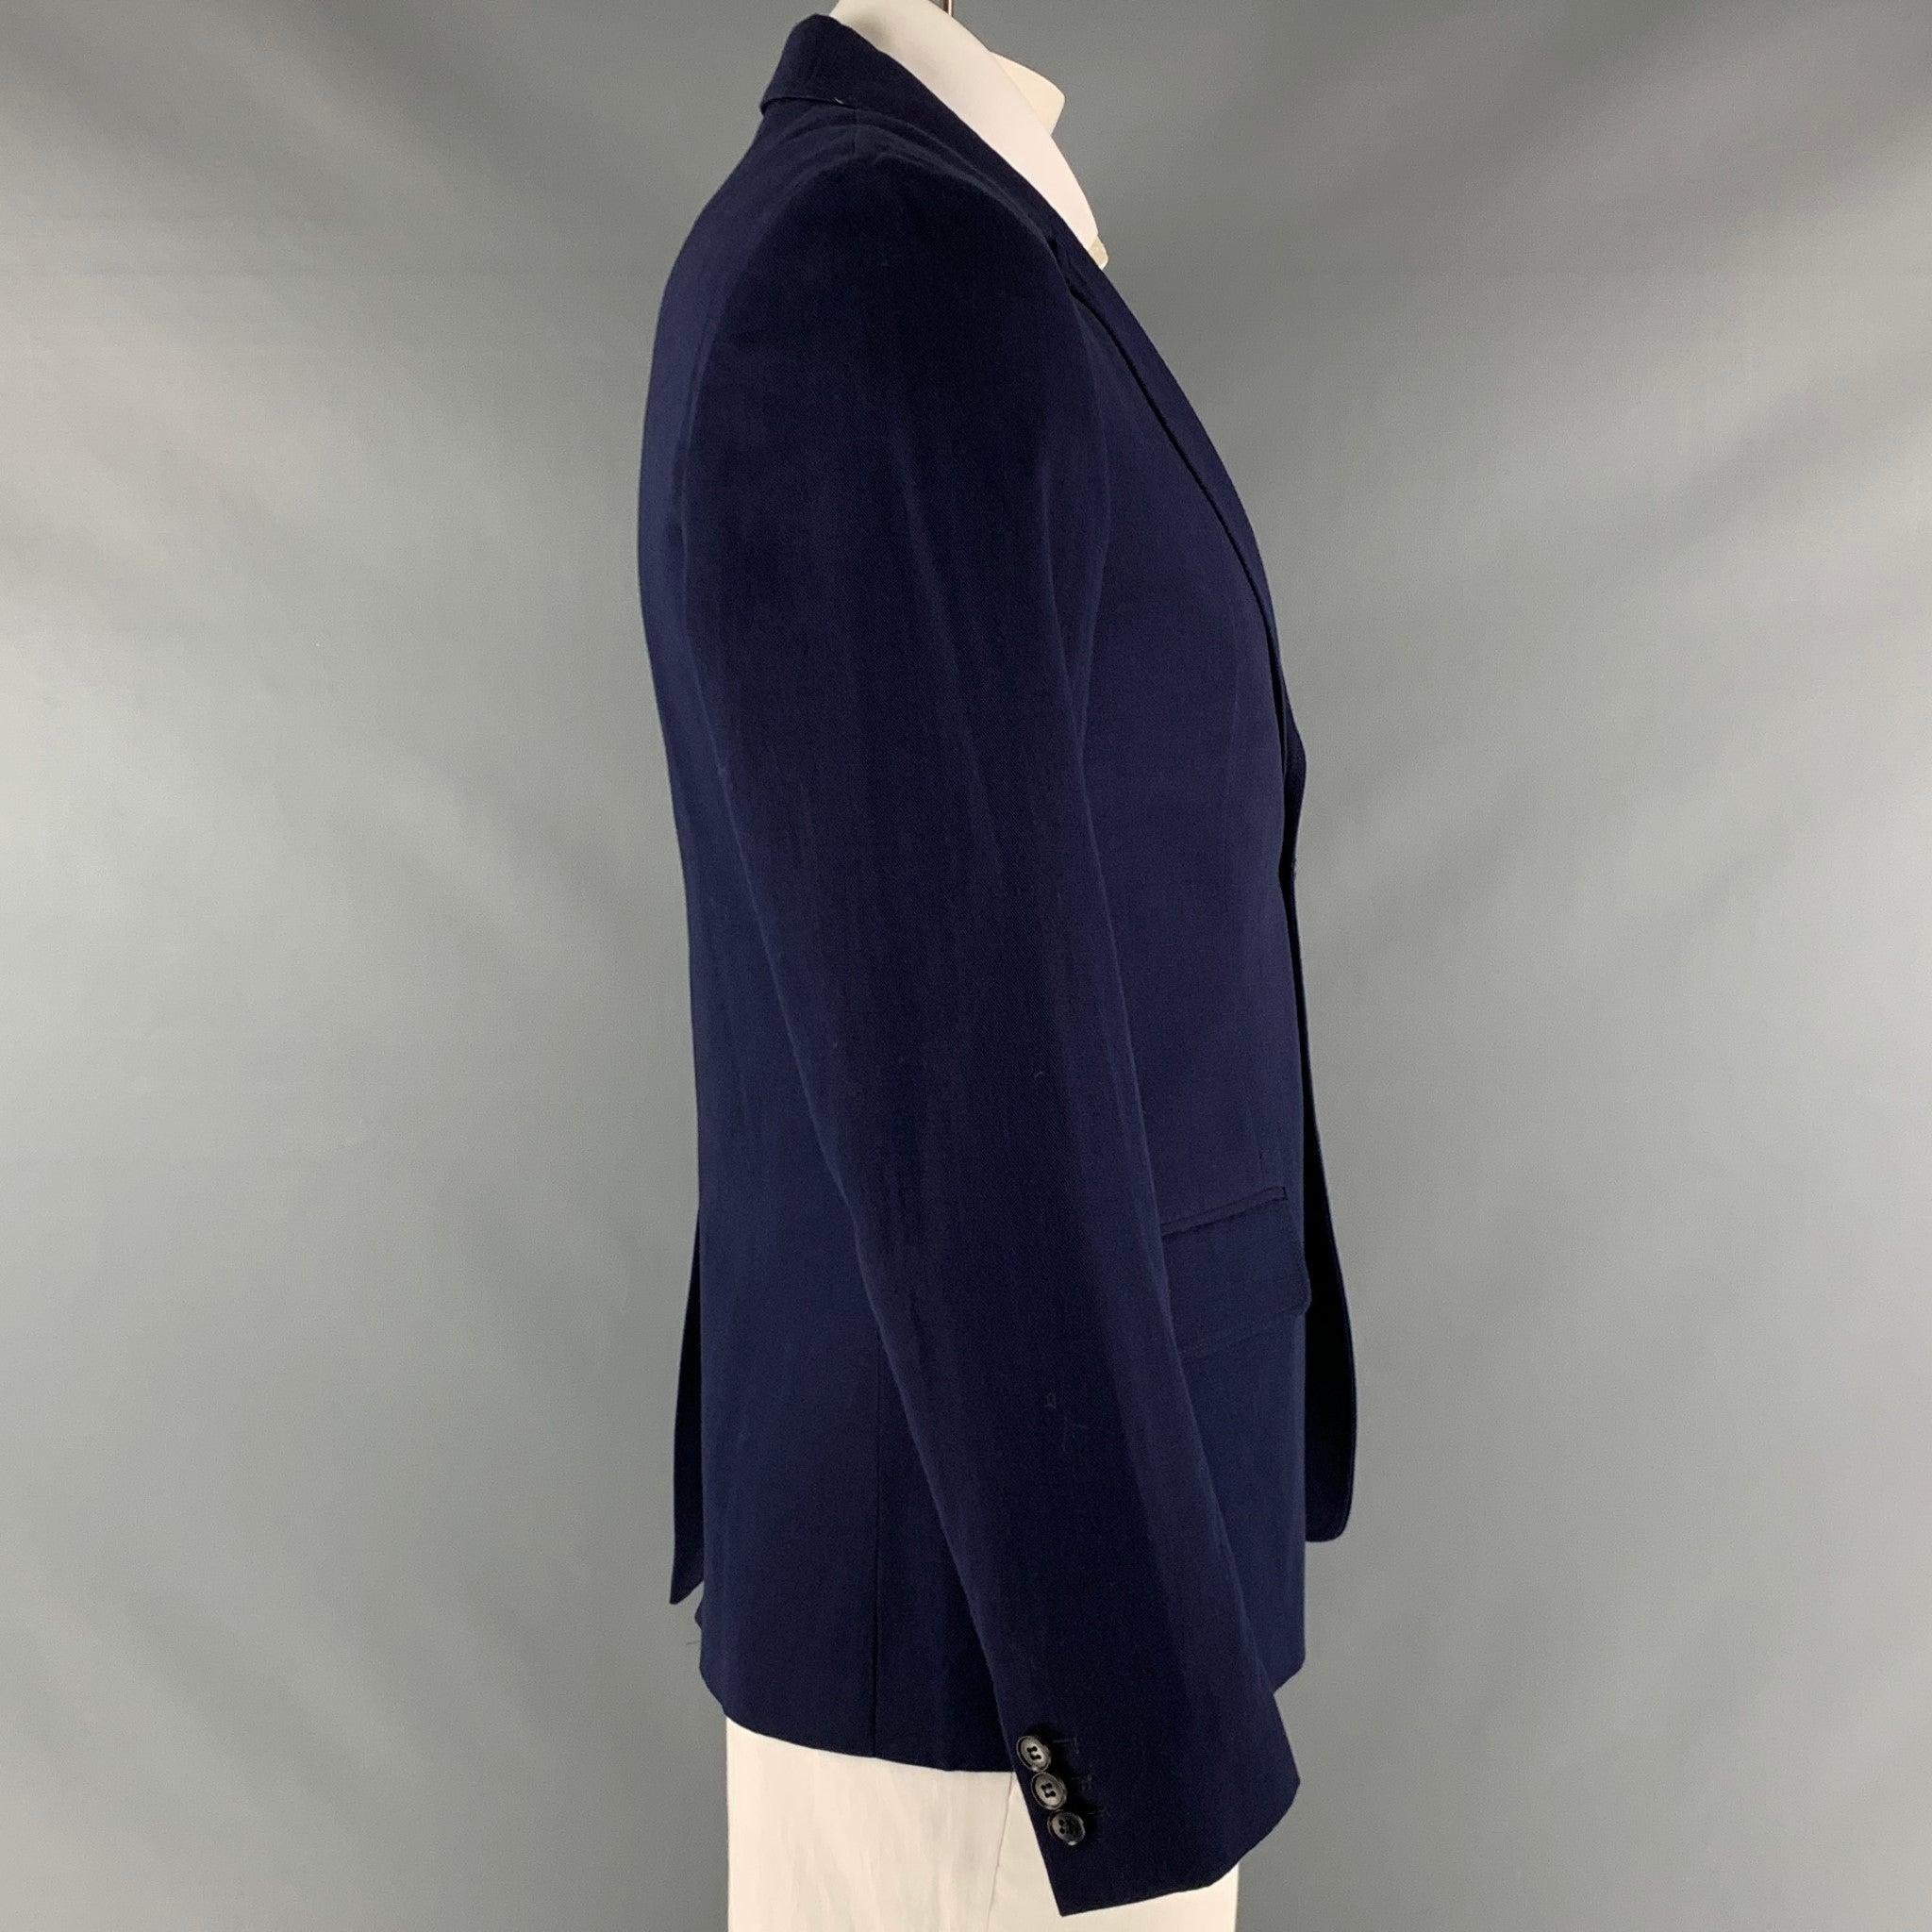 A.P.C. sport coat comes in a solid navy cotton and linen twill material and a full liner, with a notch lapel, flap pockets, a double button closure, single breasted,
 and single back vent.Excellent Pre- Owned Condition. 

Marked:  
L 

Measurements: